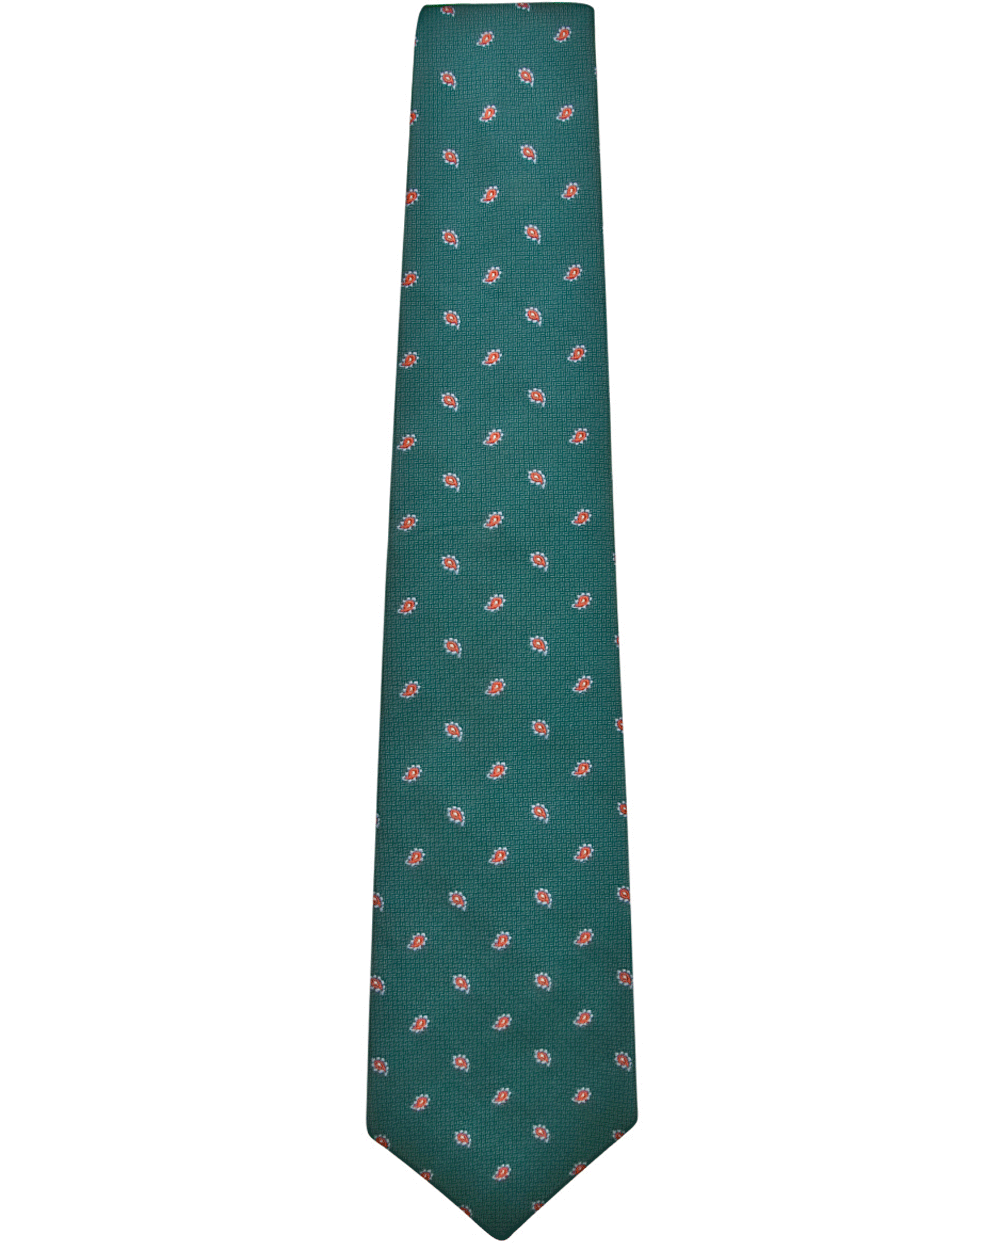 Teal and Orange Small Paisley Tie